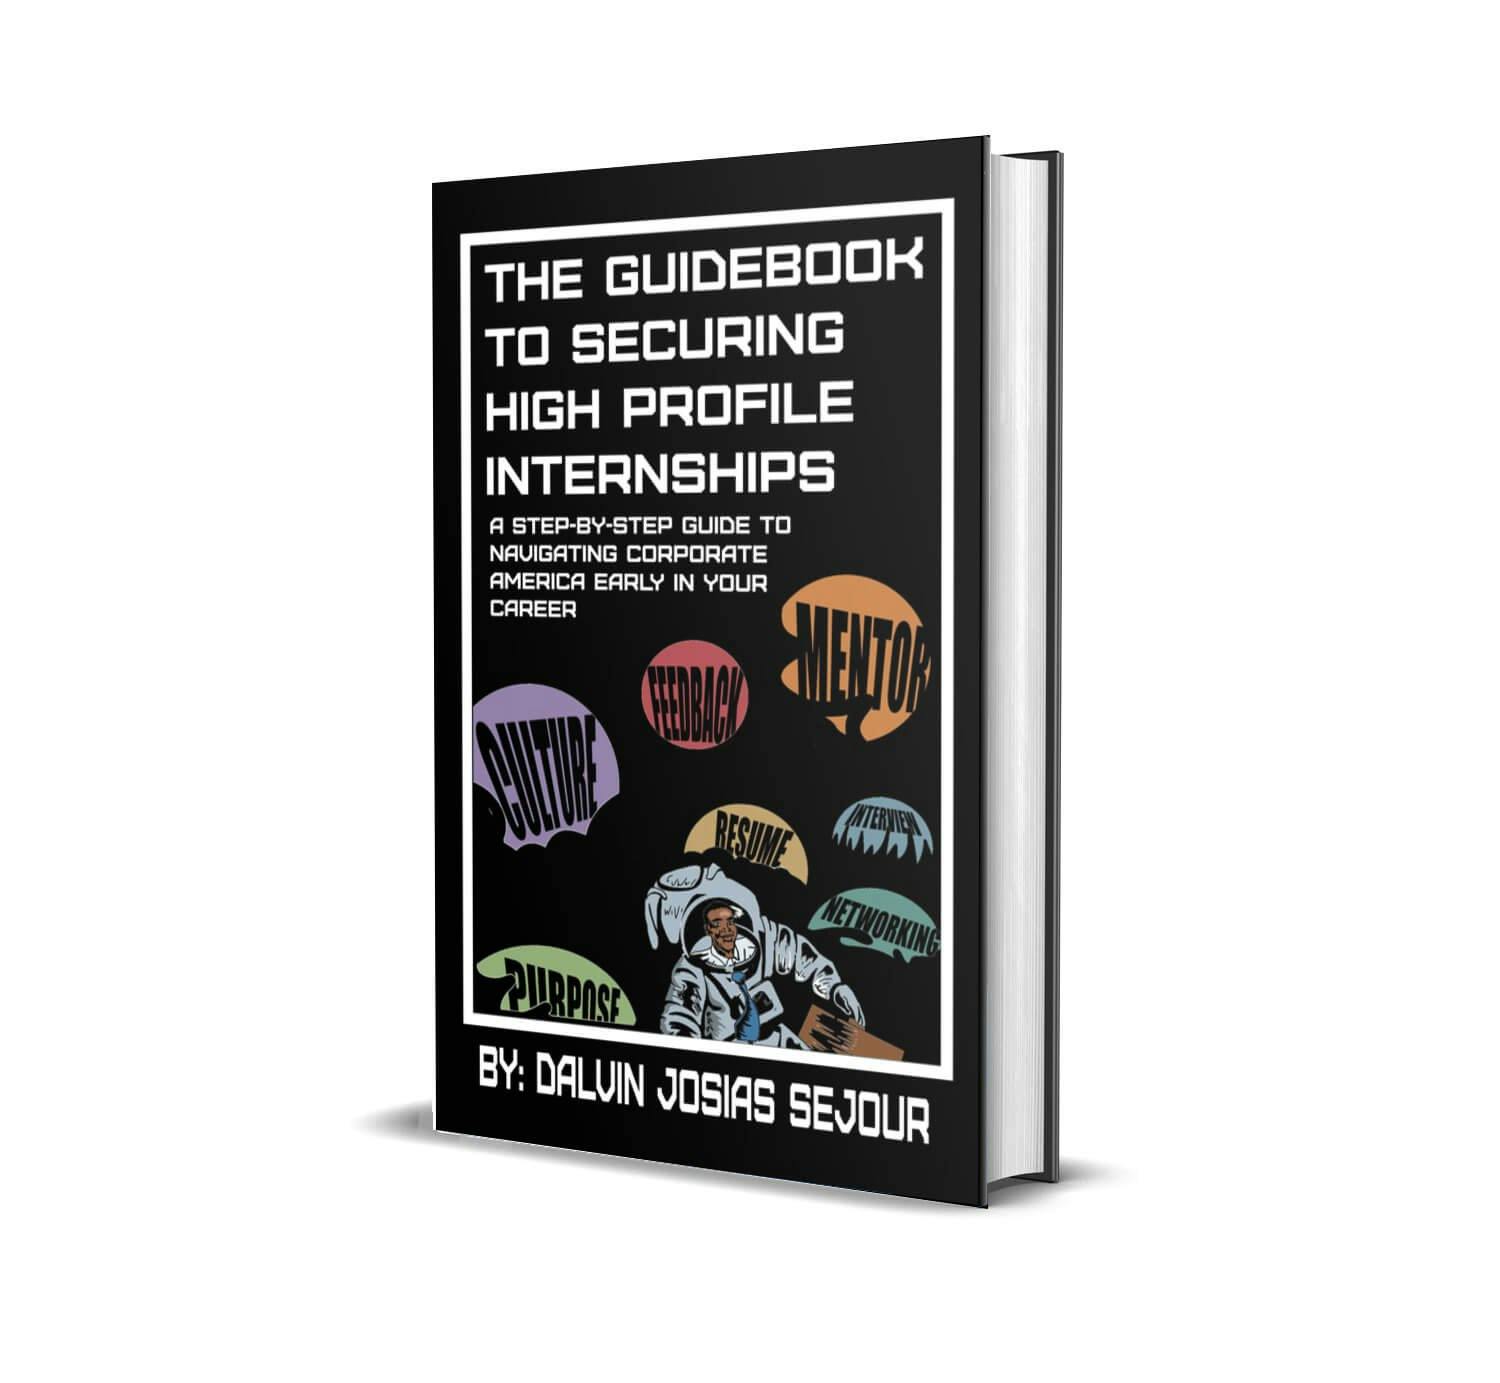 The Guidebook To Securing Internships